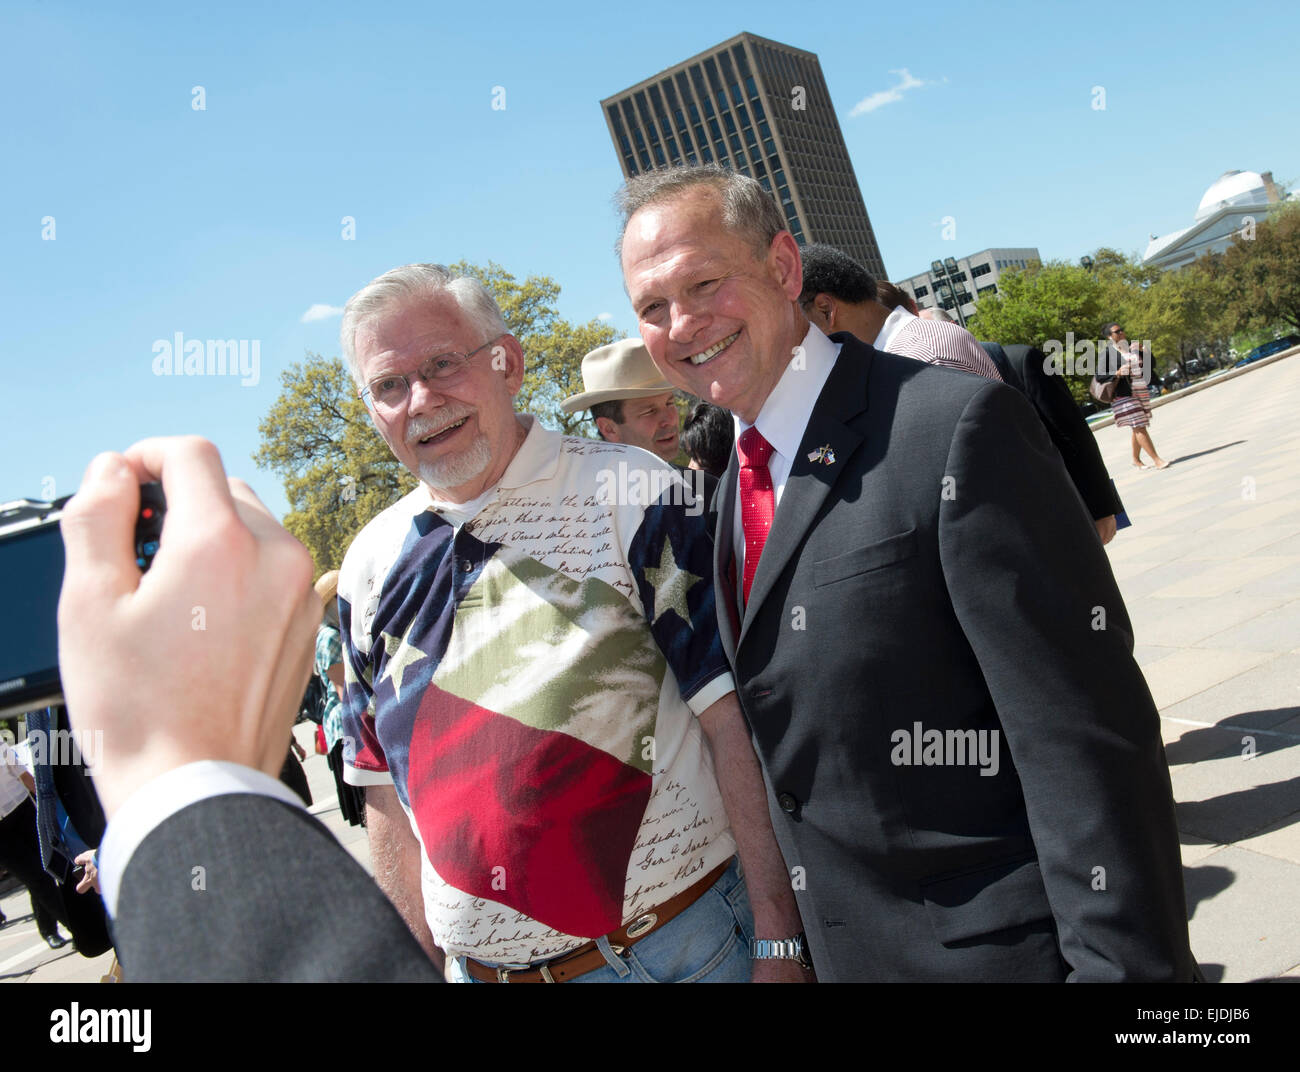 Austin, Texas, USA. 23rd March, 2015. Controversial  Alabama Supreme Court Chief Justice Roy Moore poses with a fan after speaking at a rally of conservative Texas legislators opposing gay marriage at a Texas Capitol rally Monday.  Moore has told Alabama judges to ignore a recent federal court ruling allowing gay marriage in the state. Credit:  Bob Daemmrich/Alamy Live News Stock Photo